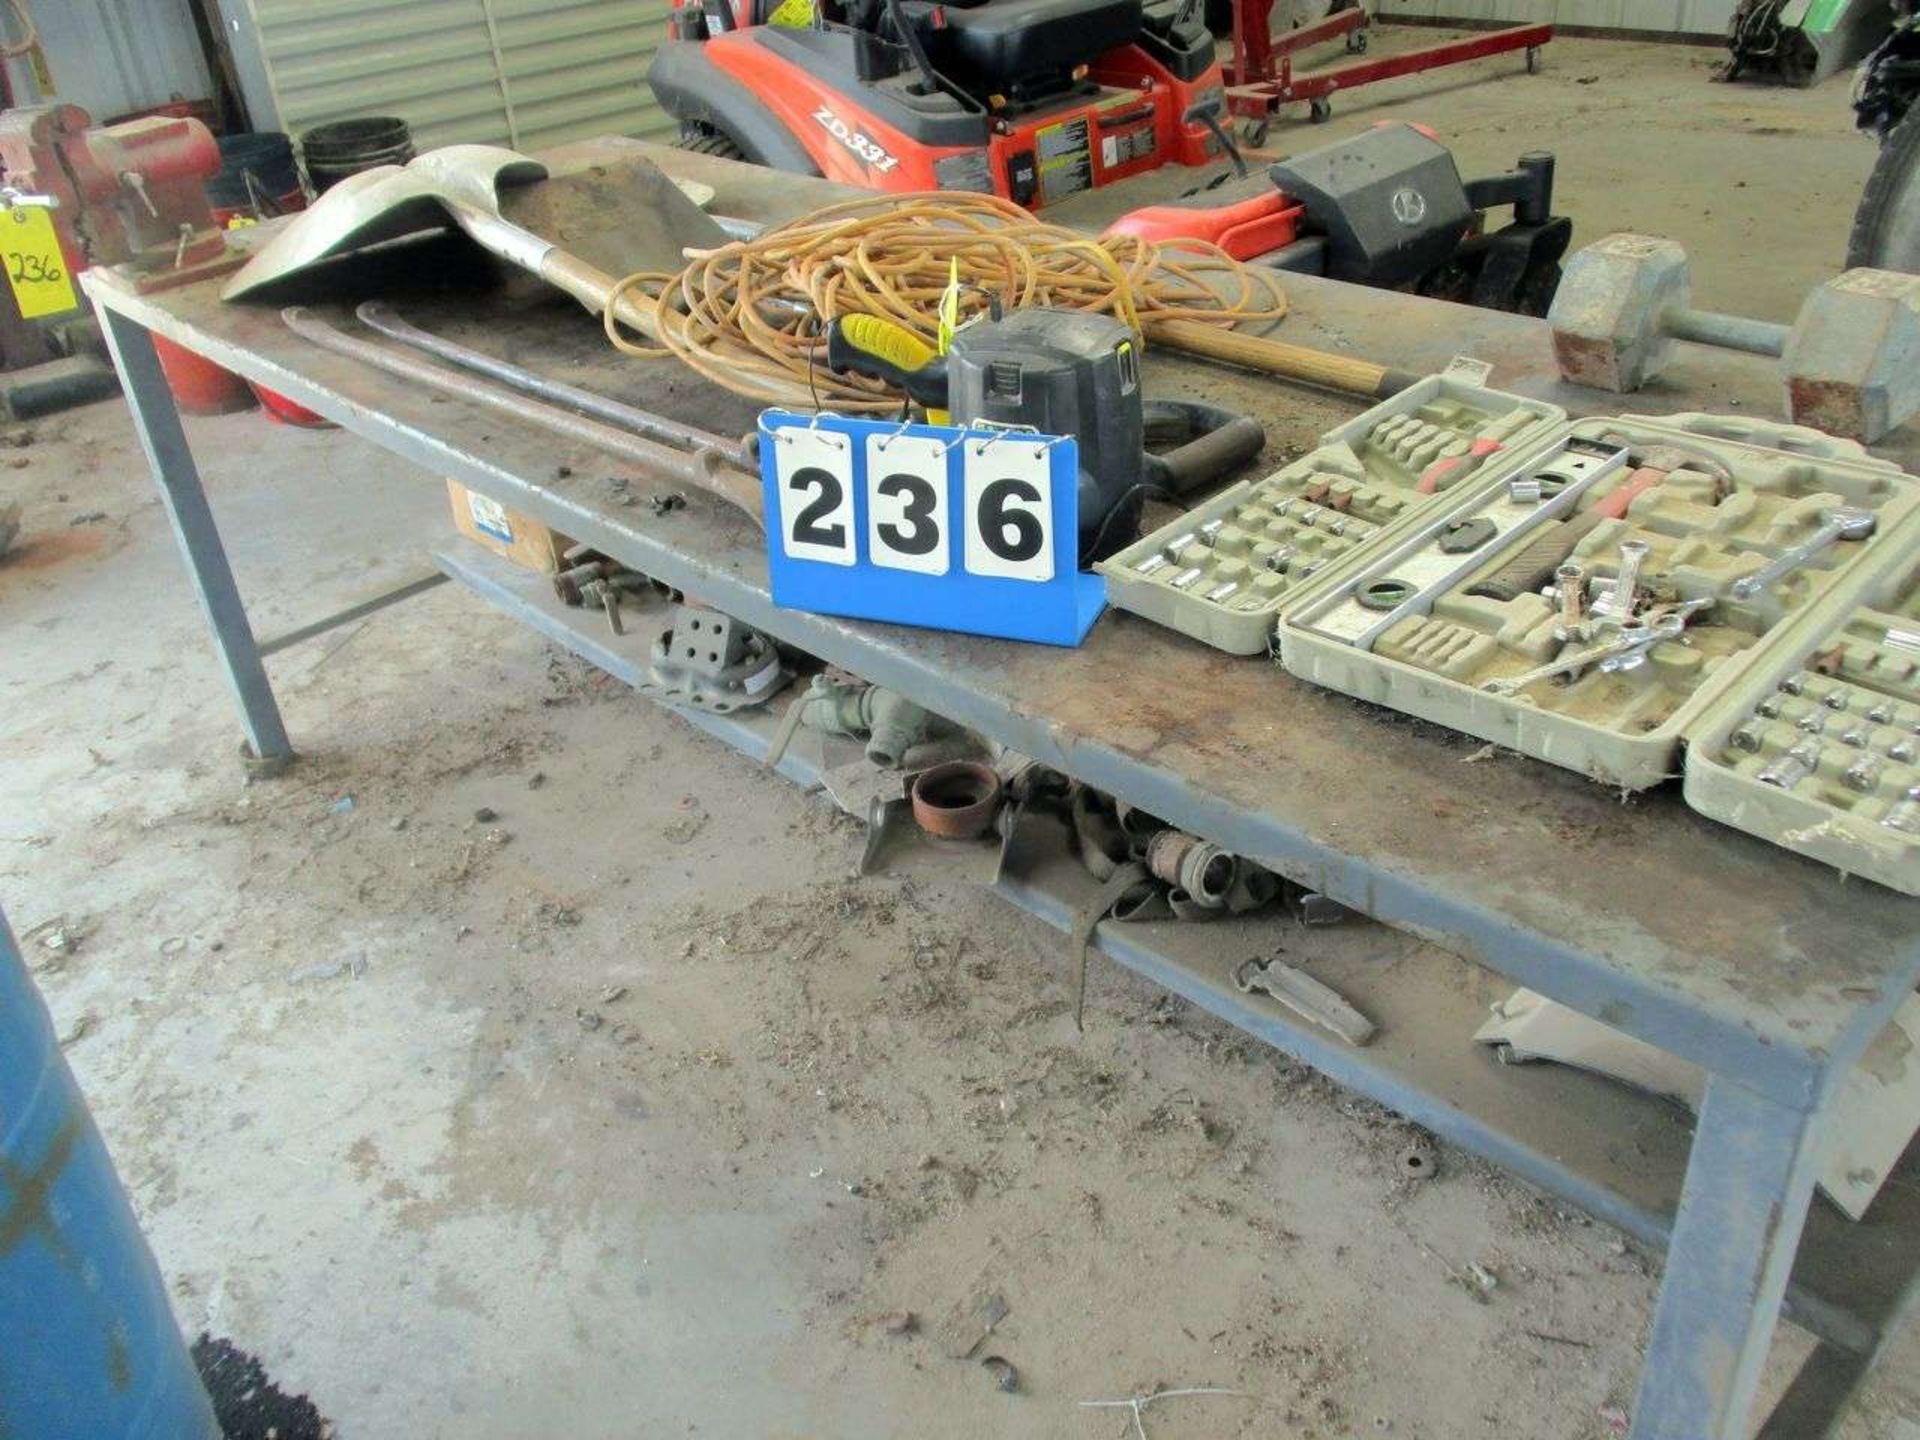 STEEL WORK BENCH/TABLE WITH CONTENTS